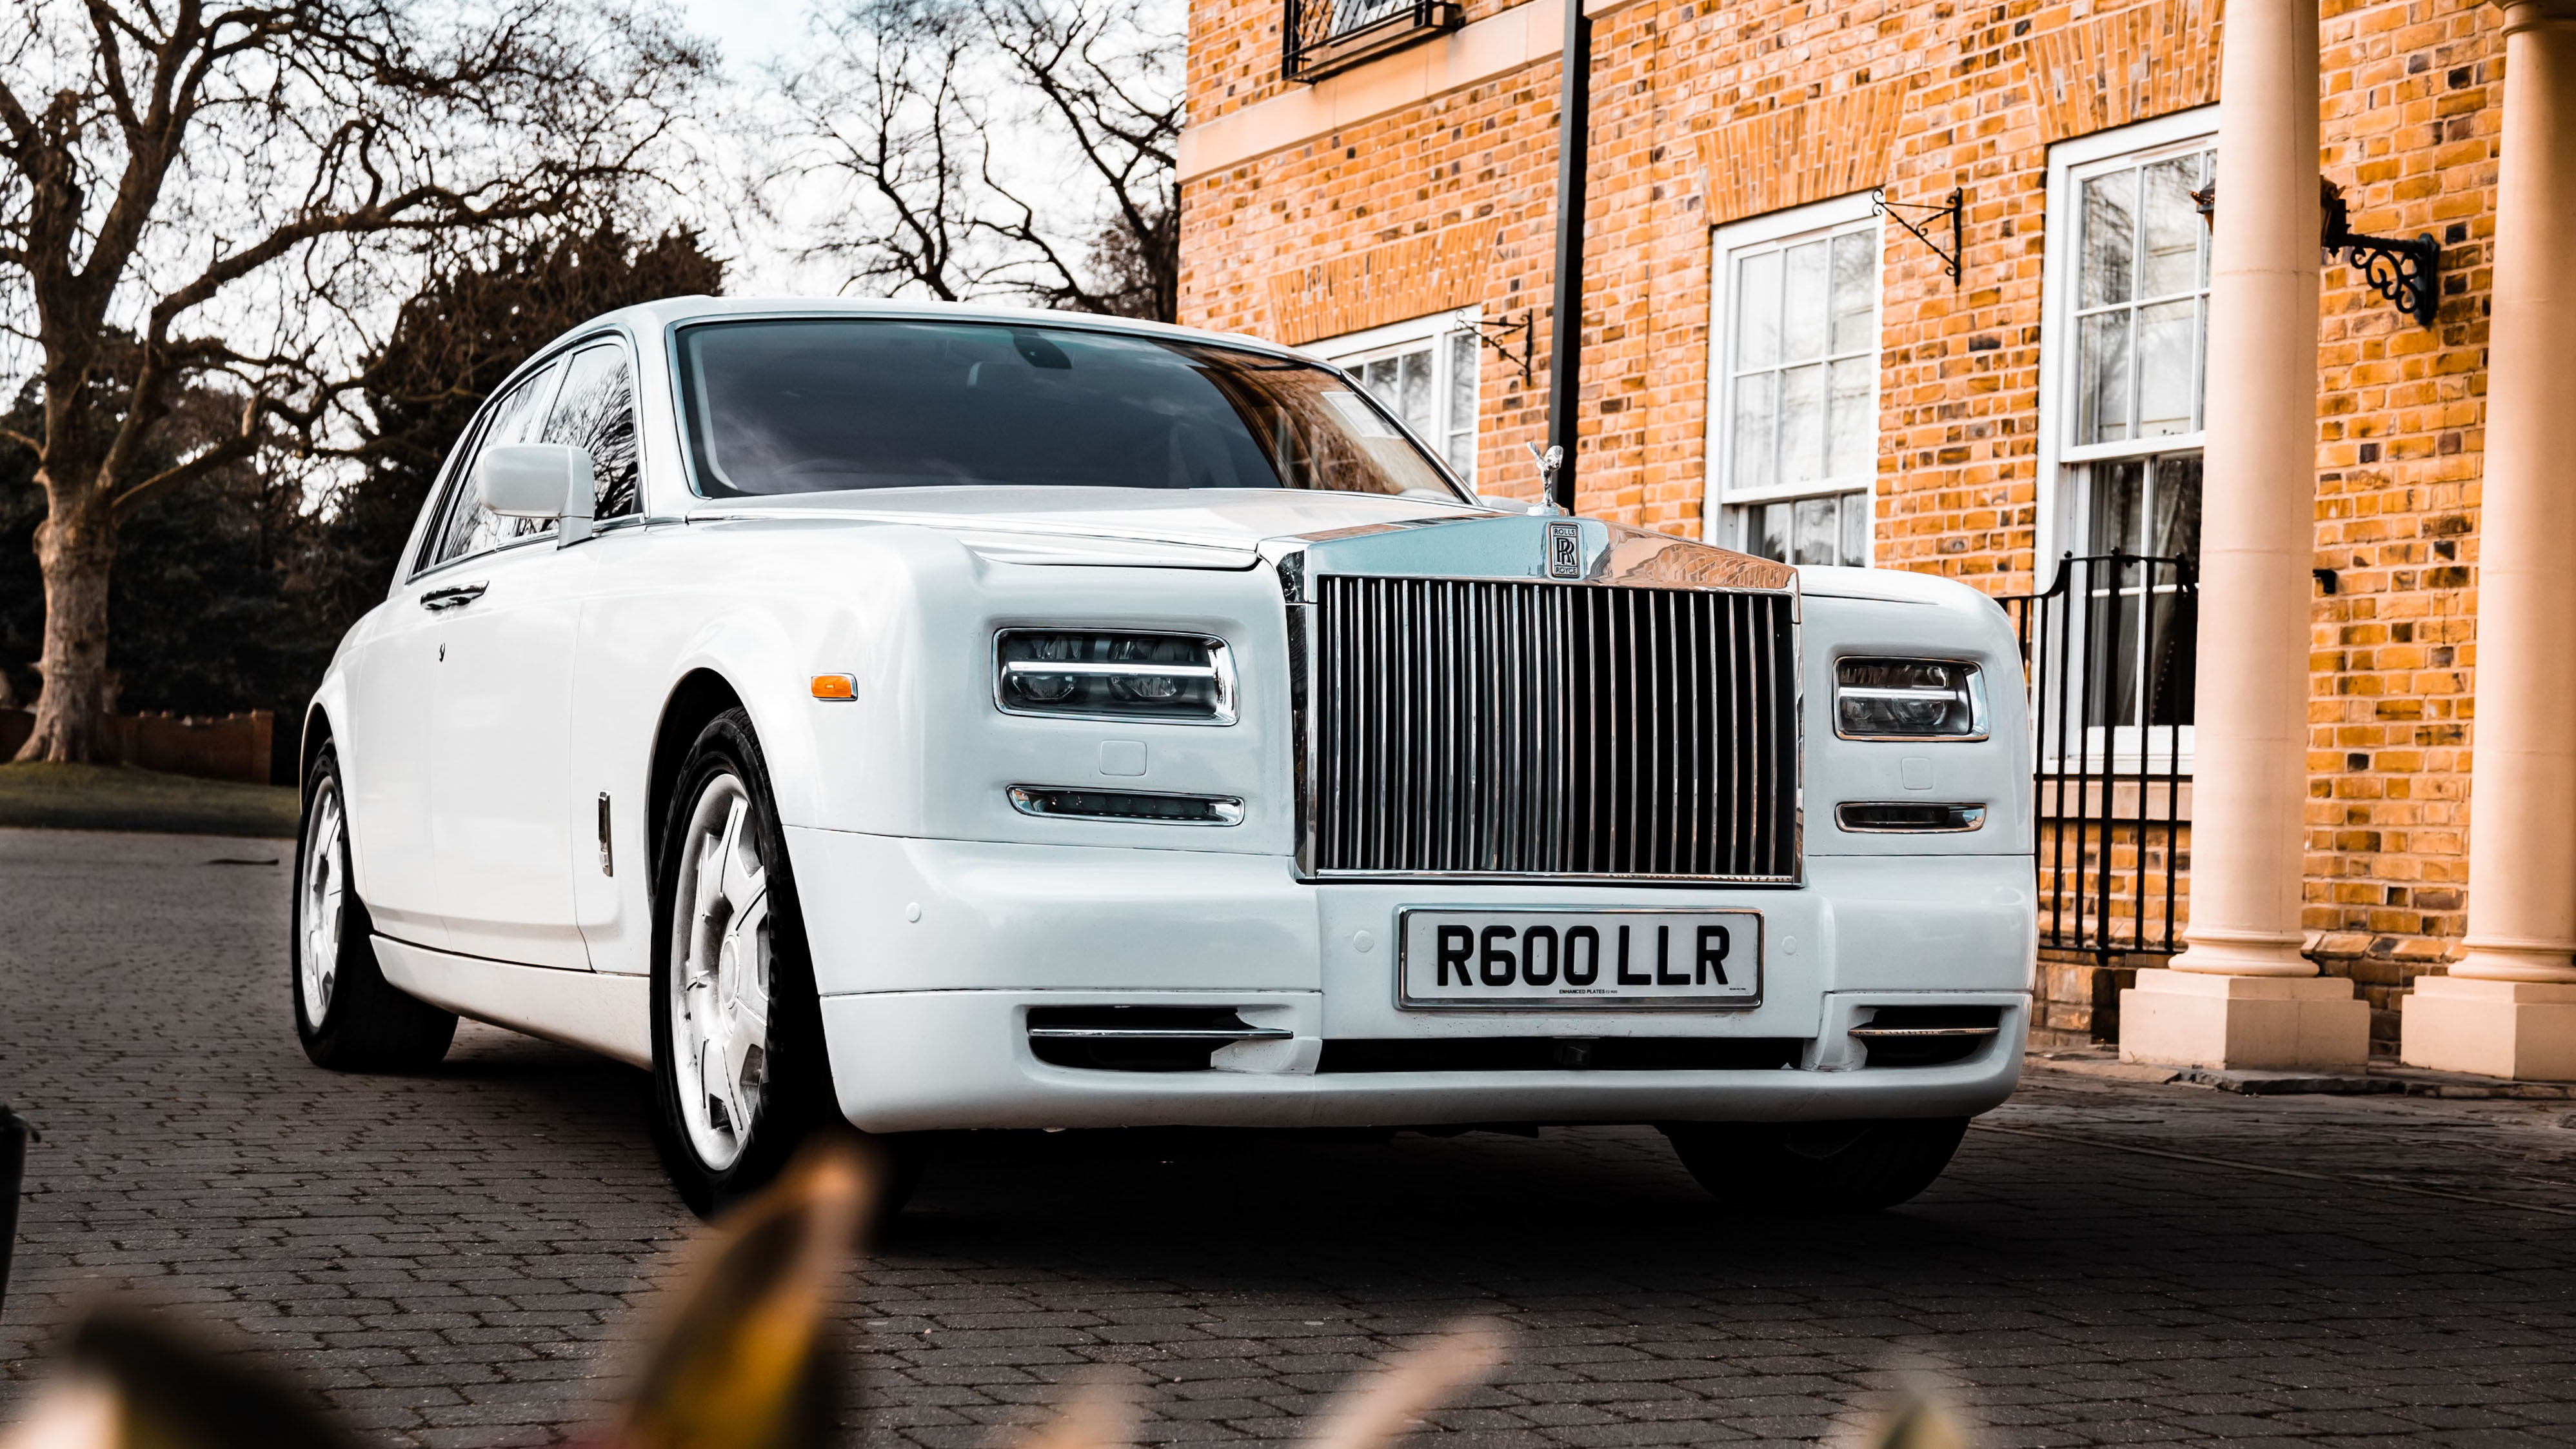 Modern white Rolls-Royce Phantom with its large chrome alloy wheels and iconic chrome front grill in attendance at a popular wedding venue in Braintree in Essex.